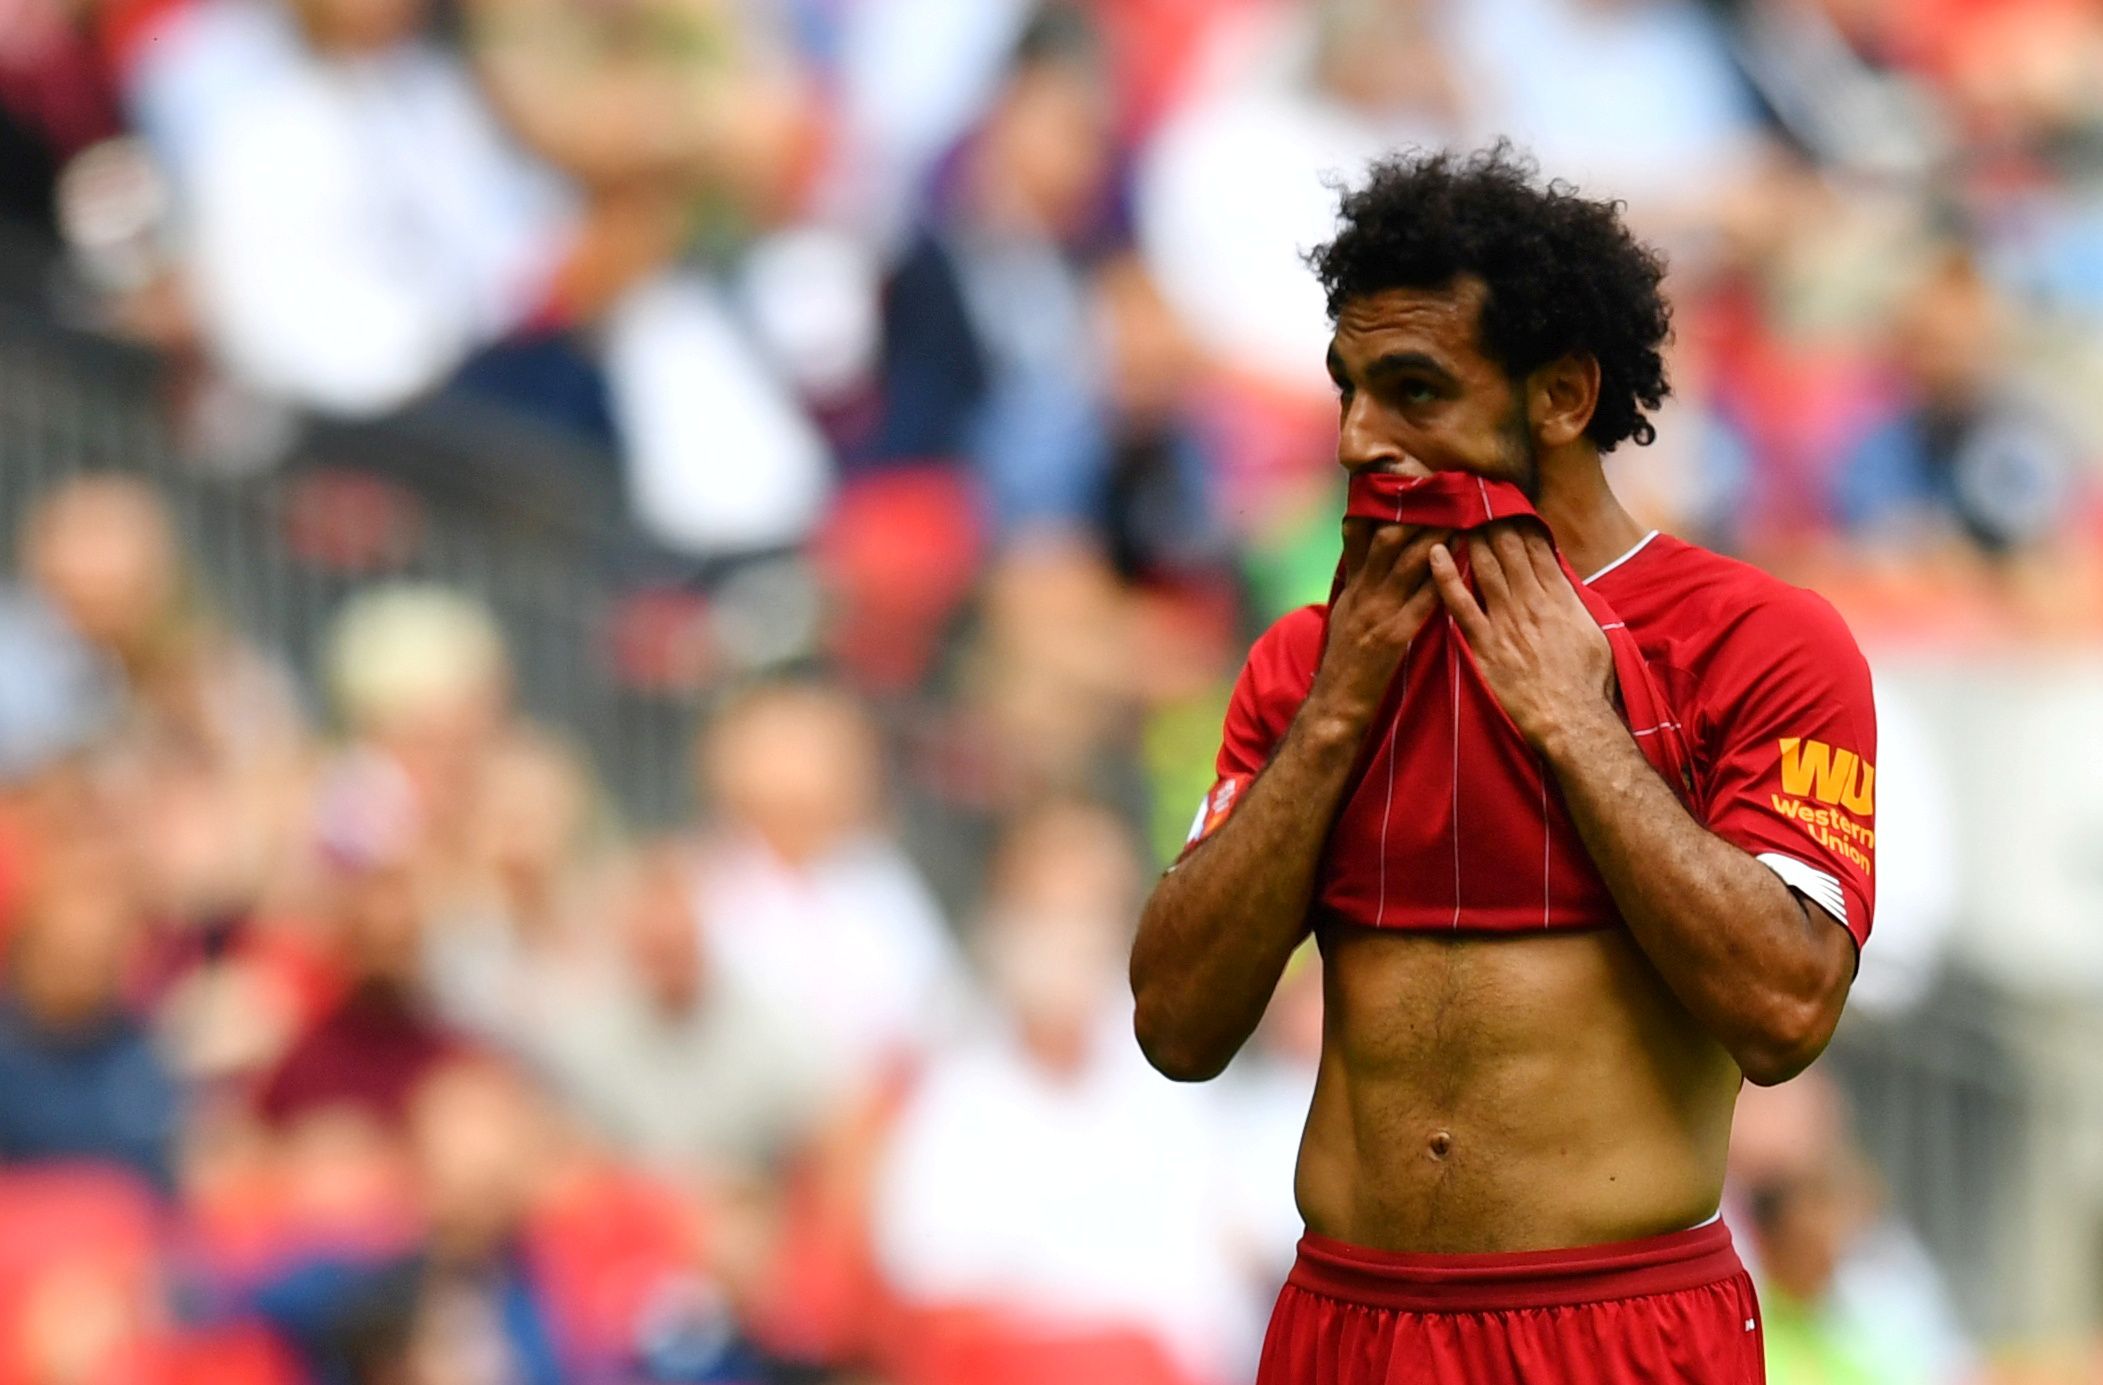 Soccer Football - FA Community Shield - Manchester City v Liverpool - Wembley Stadium, London, Britain - August 4, 2019  Liverpool's Mohamed Salah reacts during the match   REUTERS/Dylan Martinez